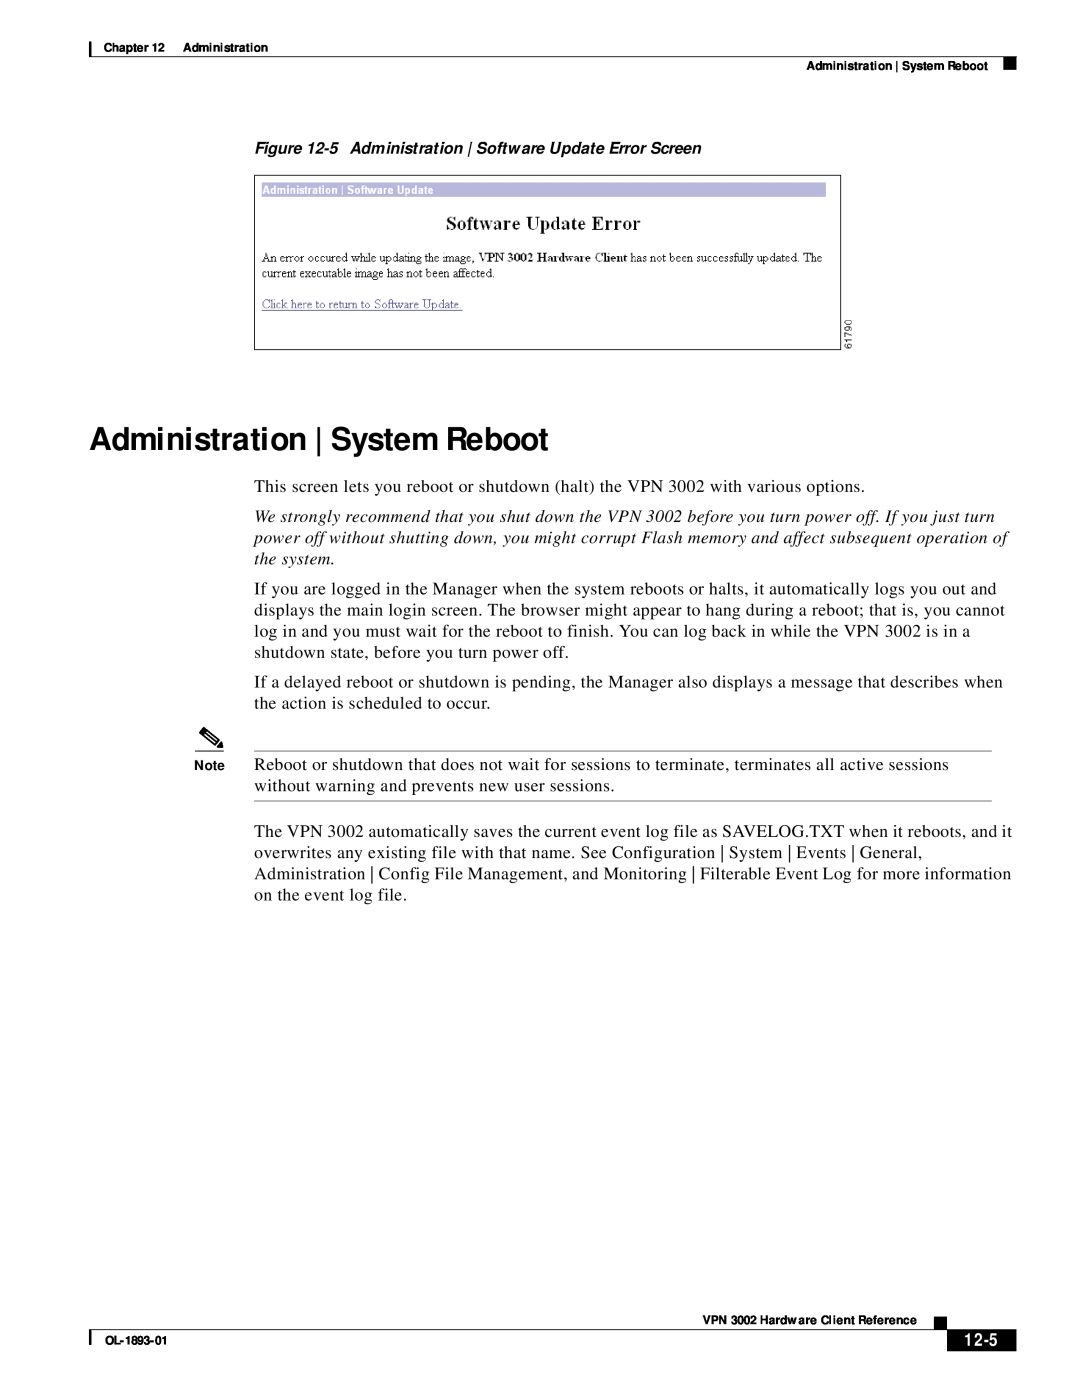 Cisco Systems manual Administration | System Reboot, 12-5, VPN 3002 Hardware Client Reference, OL-1893-01 